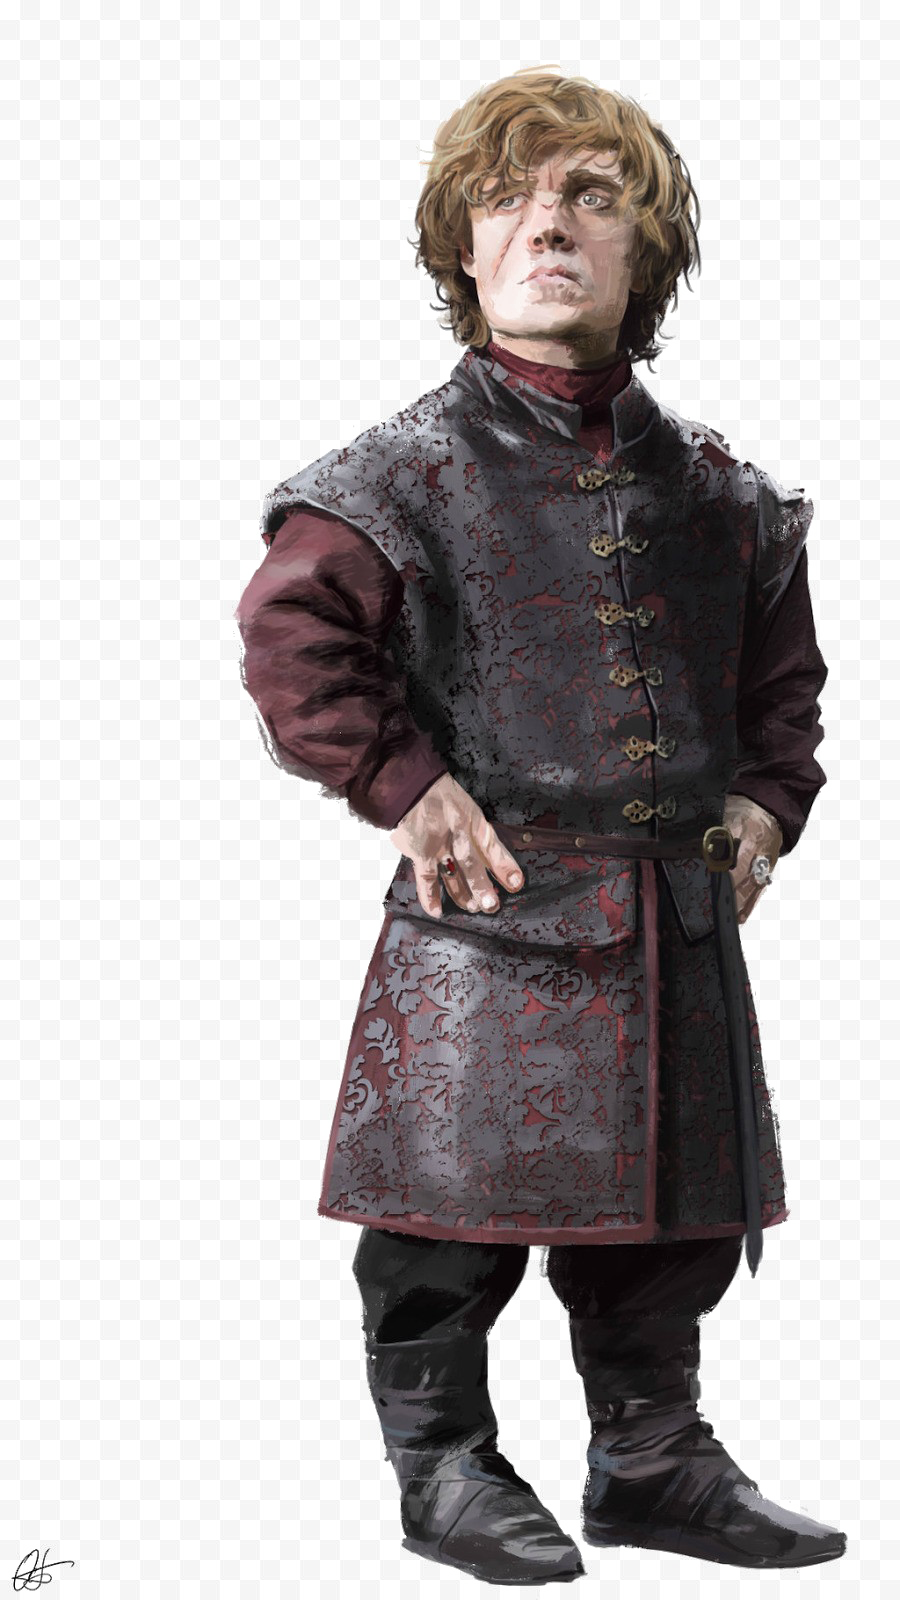 Tyrion Lannister PNG High-Quality Image